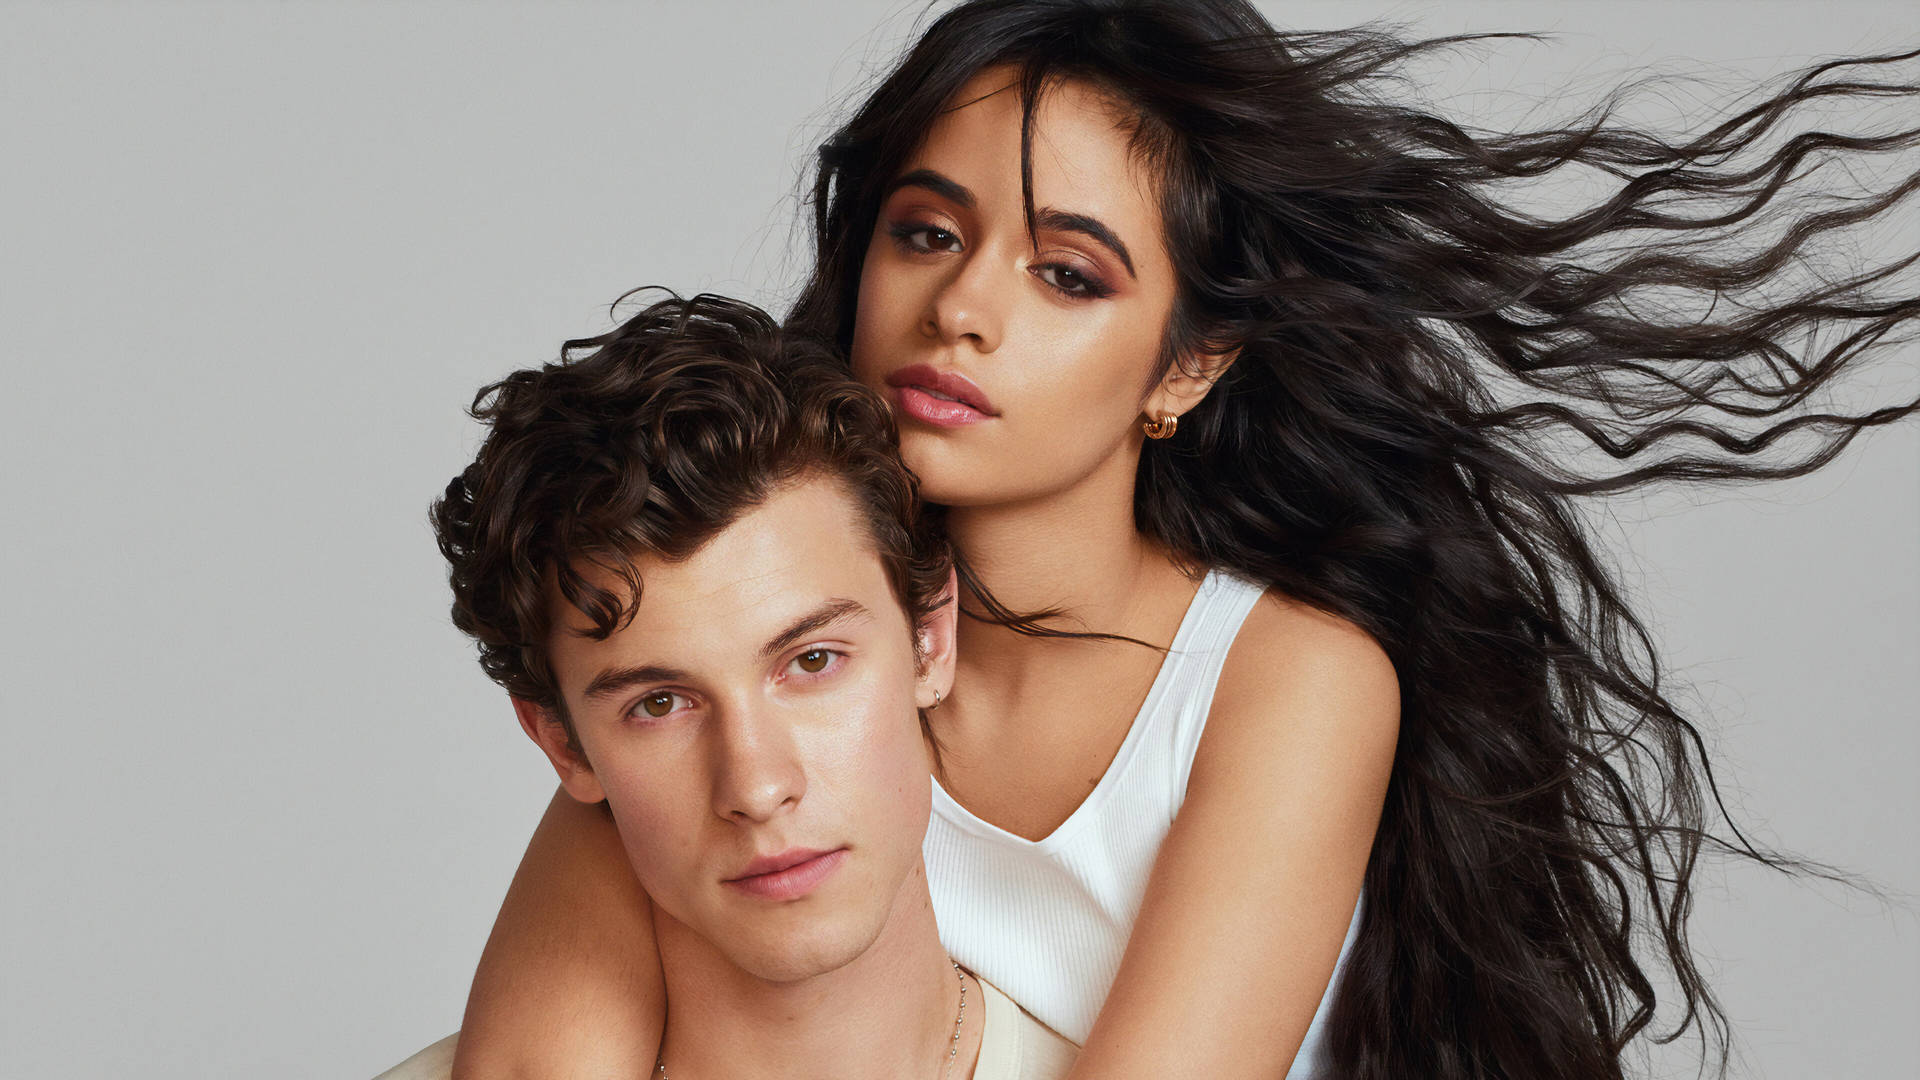 Shawn Mendes And Camila Cabello Background